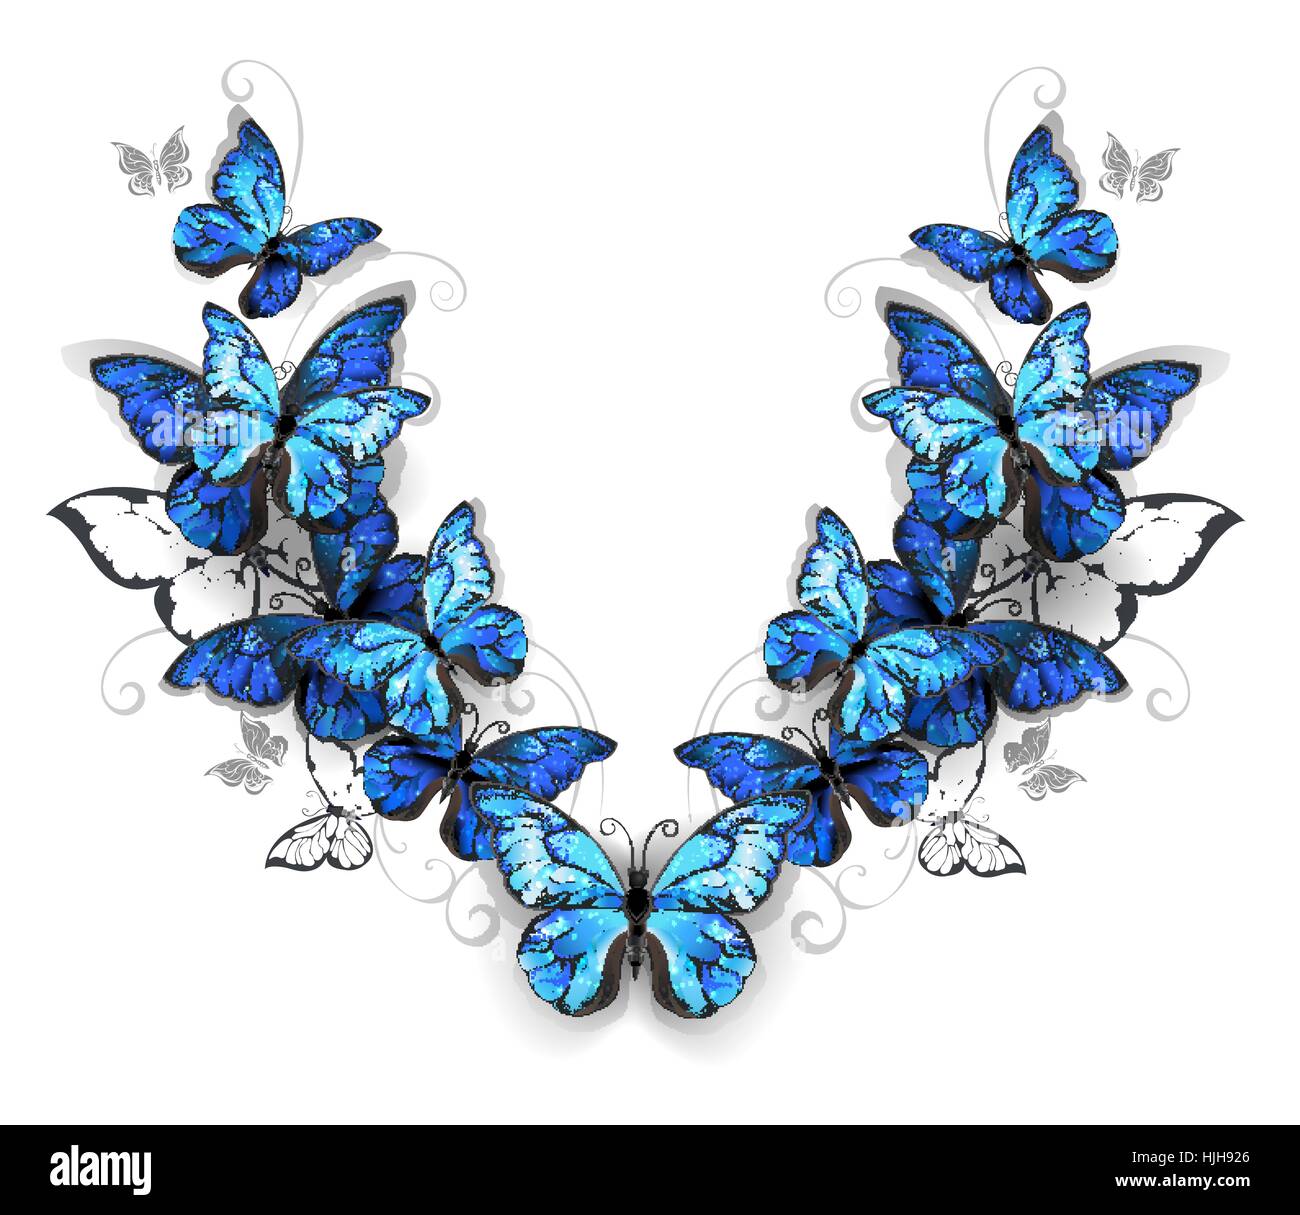 Symmetrical pattern of blue, realistic morfid butterflies on a white background. Design with butterflies. Morpho. Design with blue butterflies morpho. Stock Vector